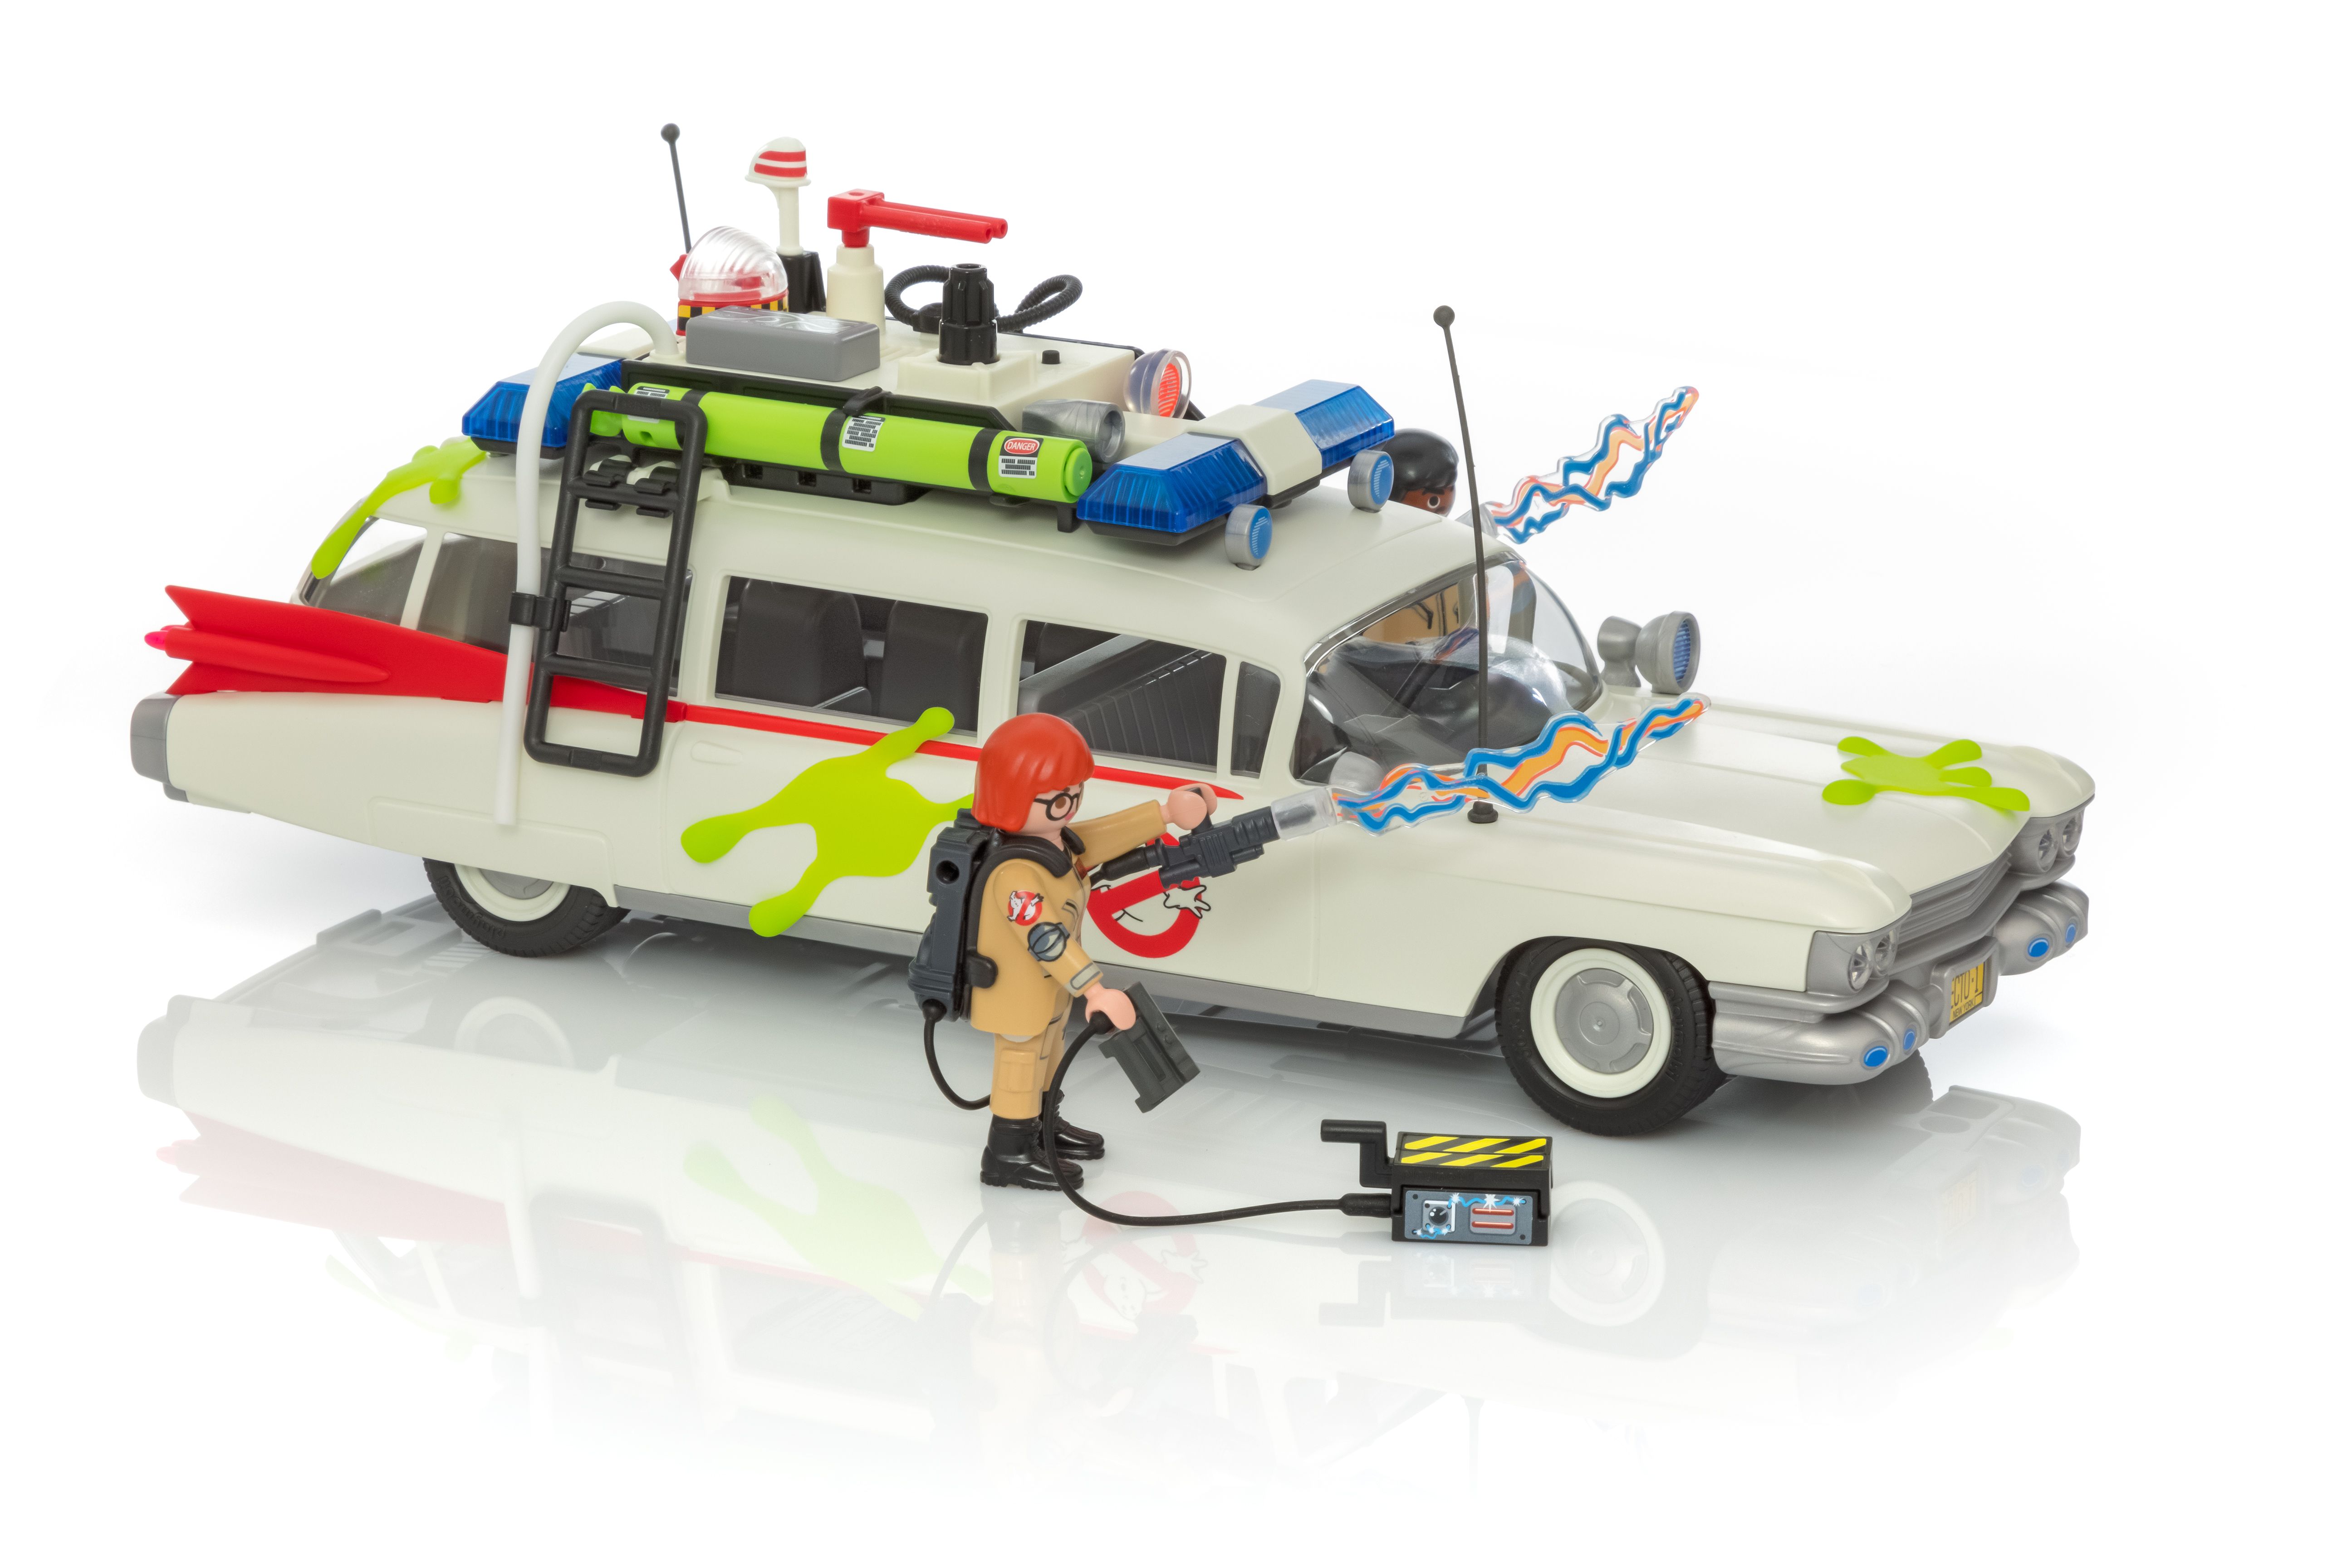 10274 ghostbusters ecto 1